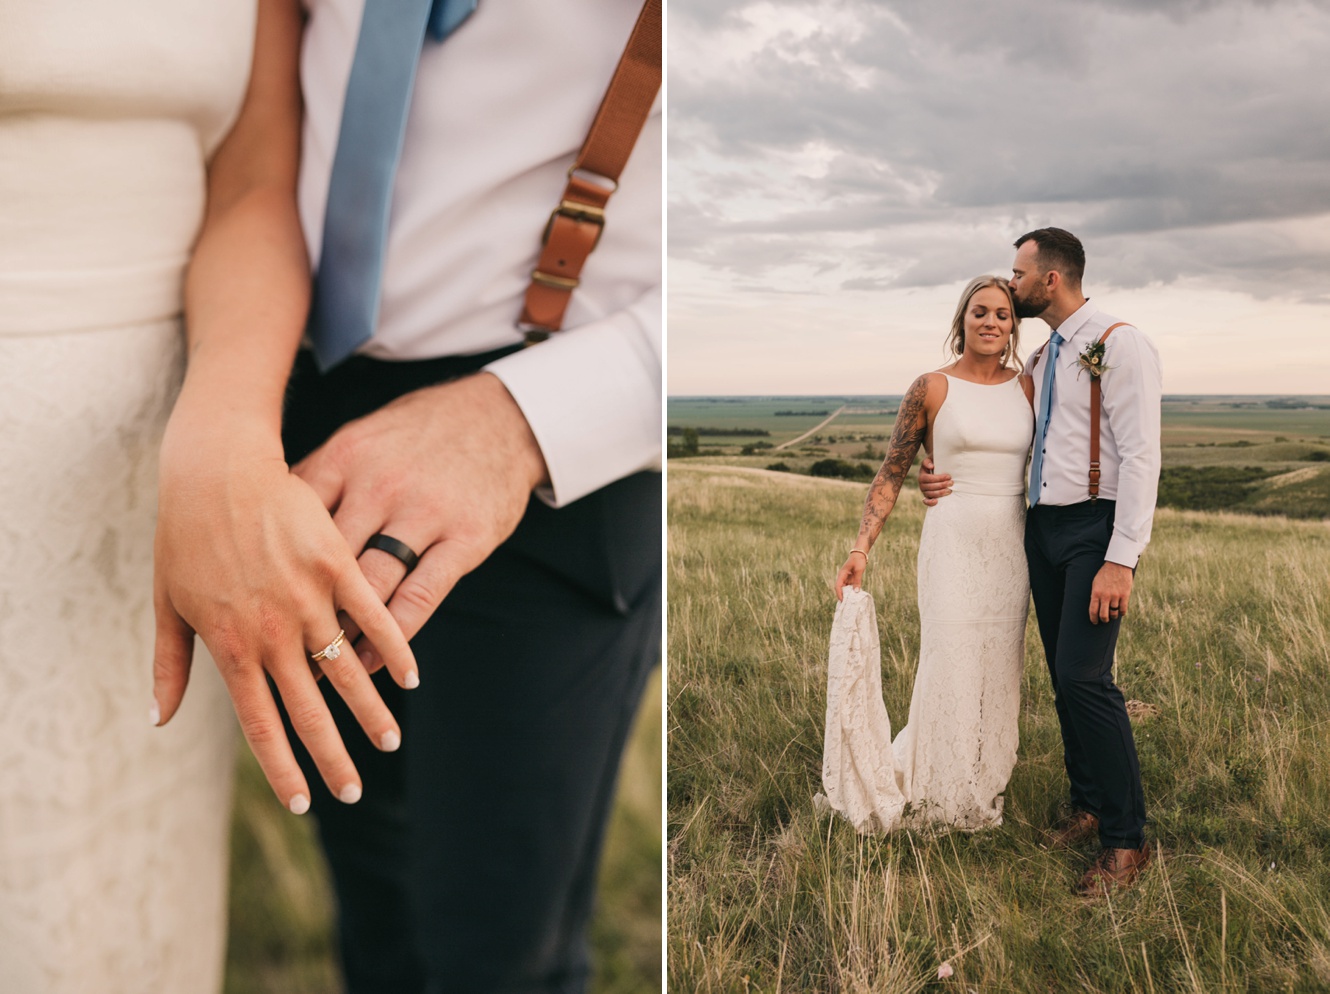 Intimate sunset bride and groom portraits